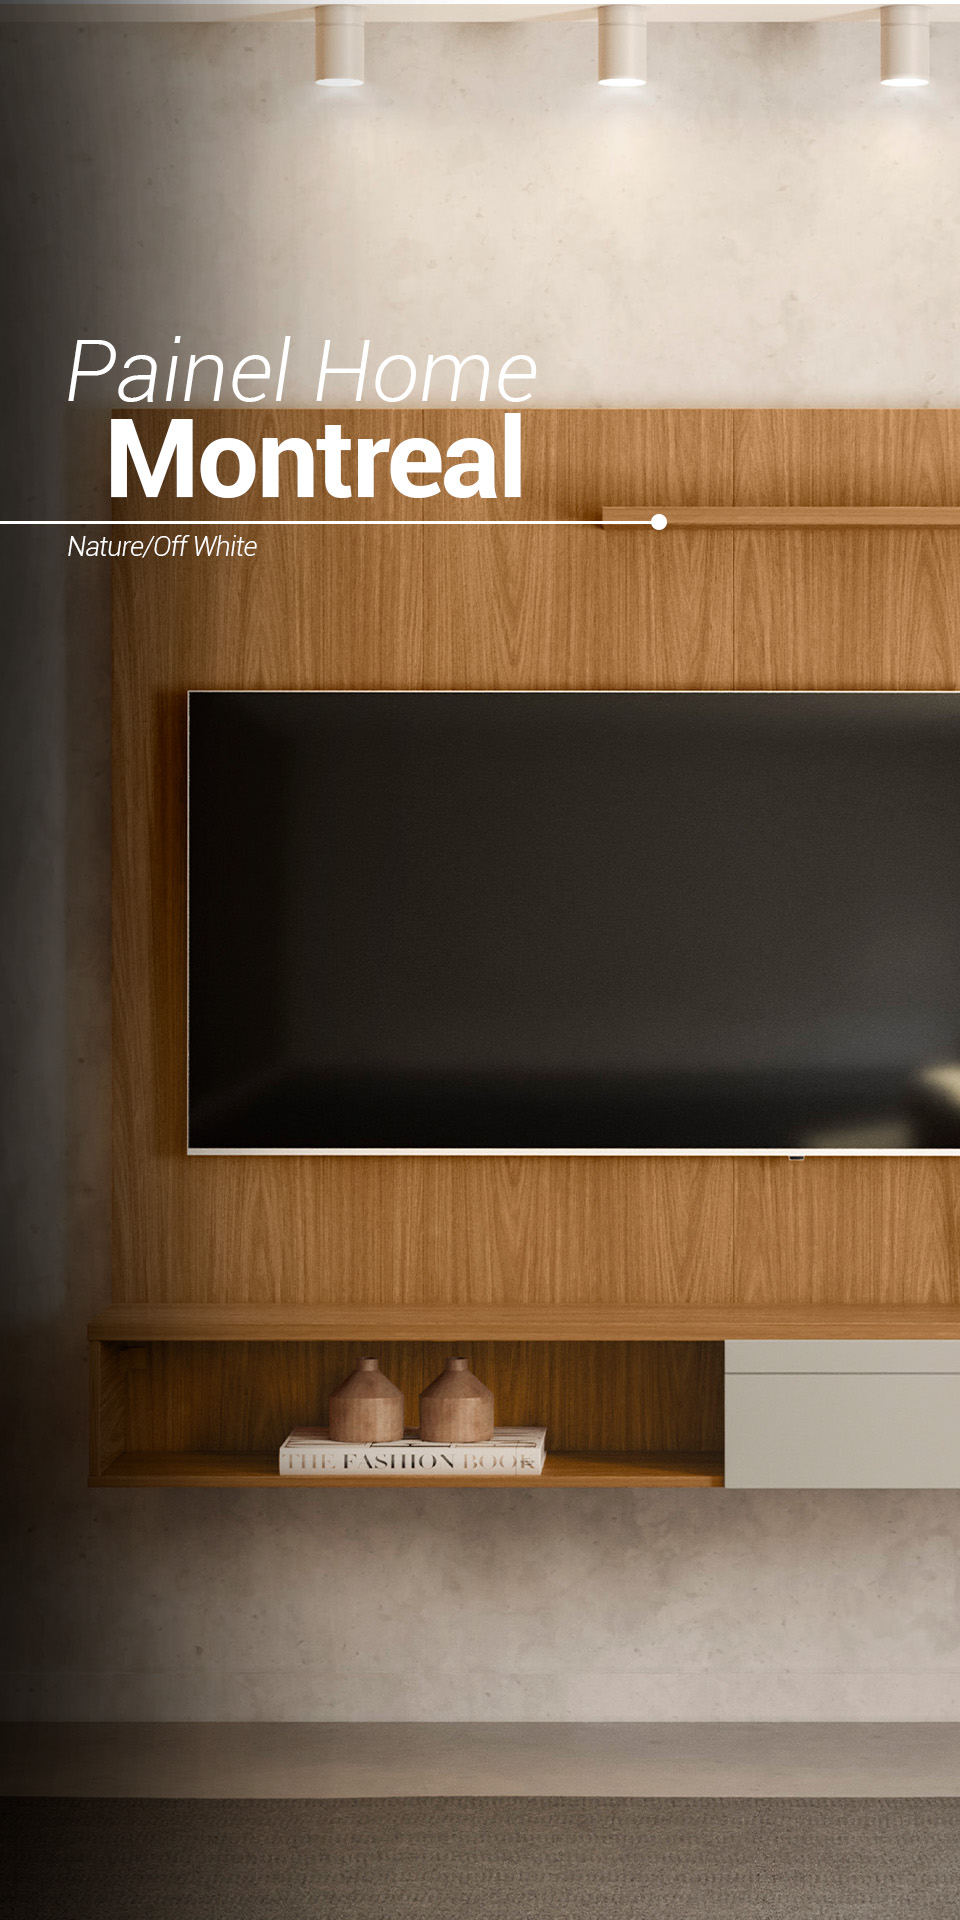 Painel Home Montreal